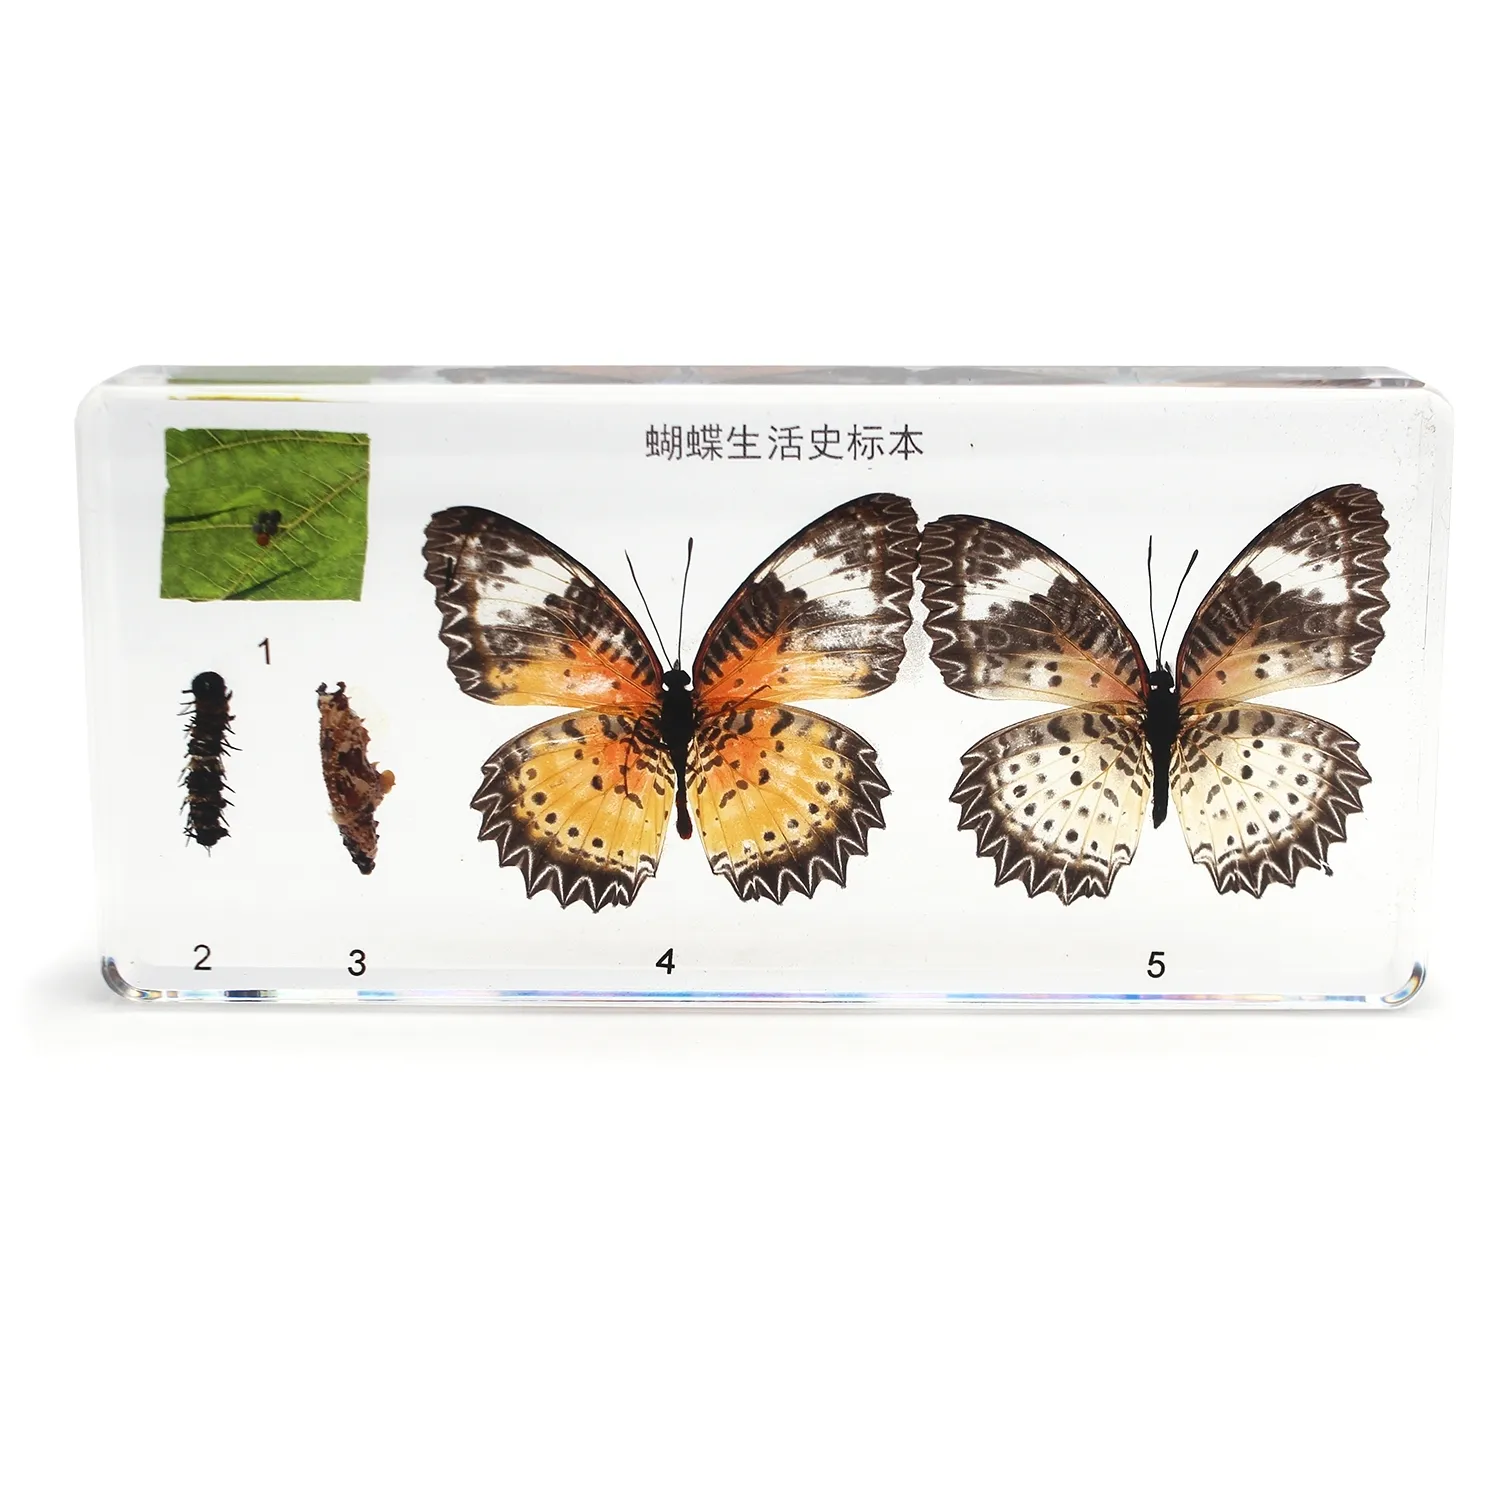 Benji Life Cycle Of A Butterfly Insects Specimen - Clear Acrylic Biological Science Kit